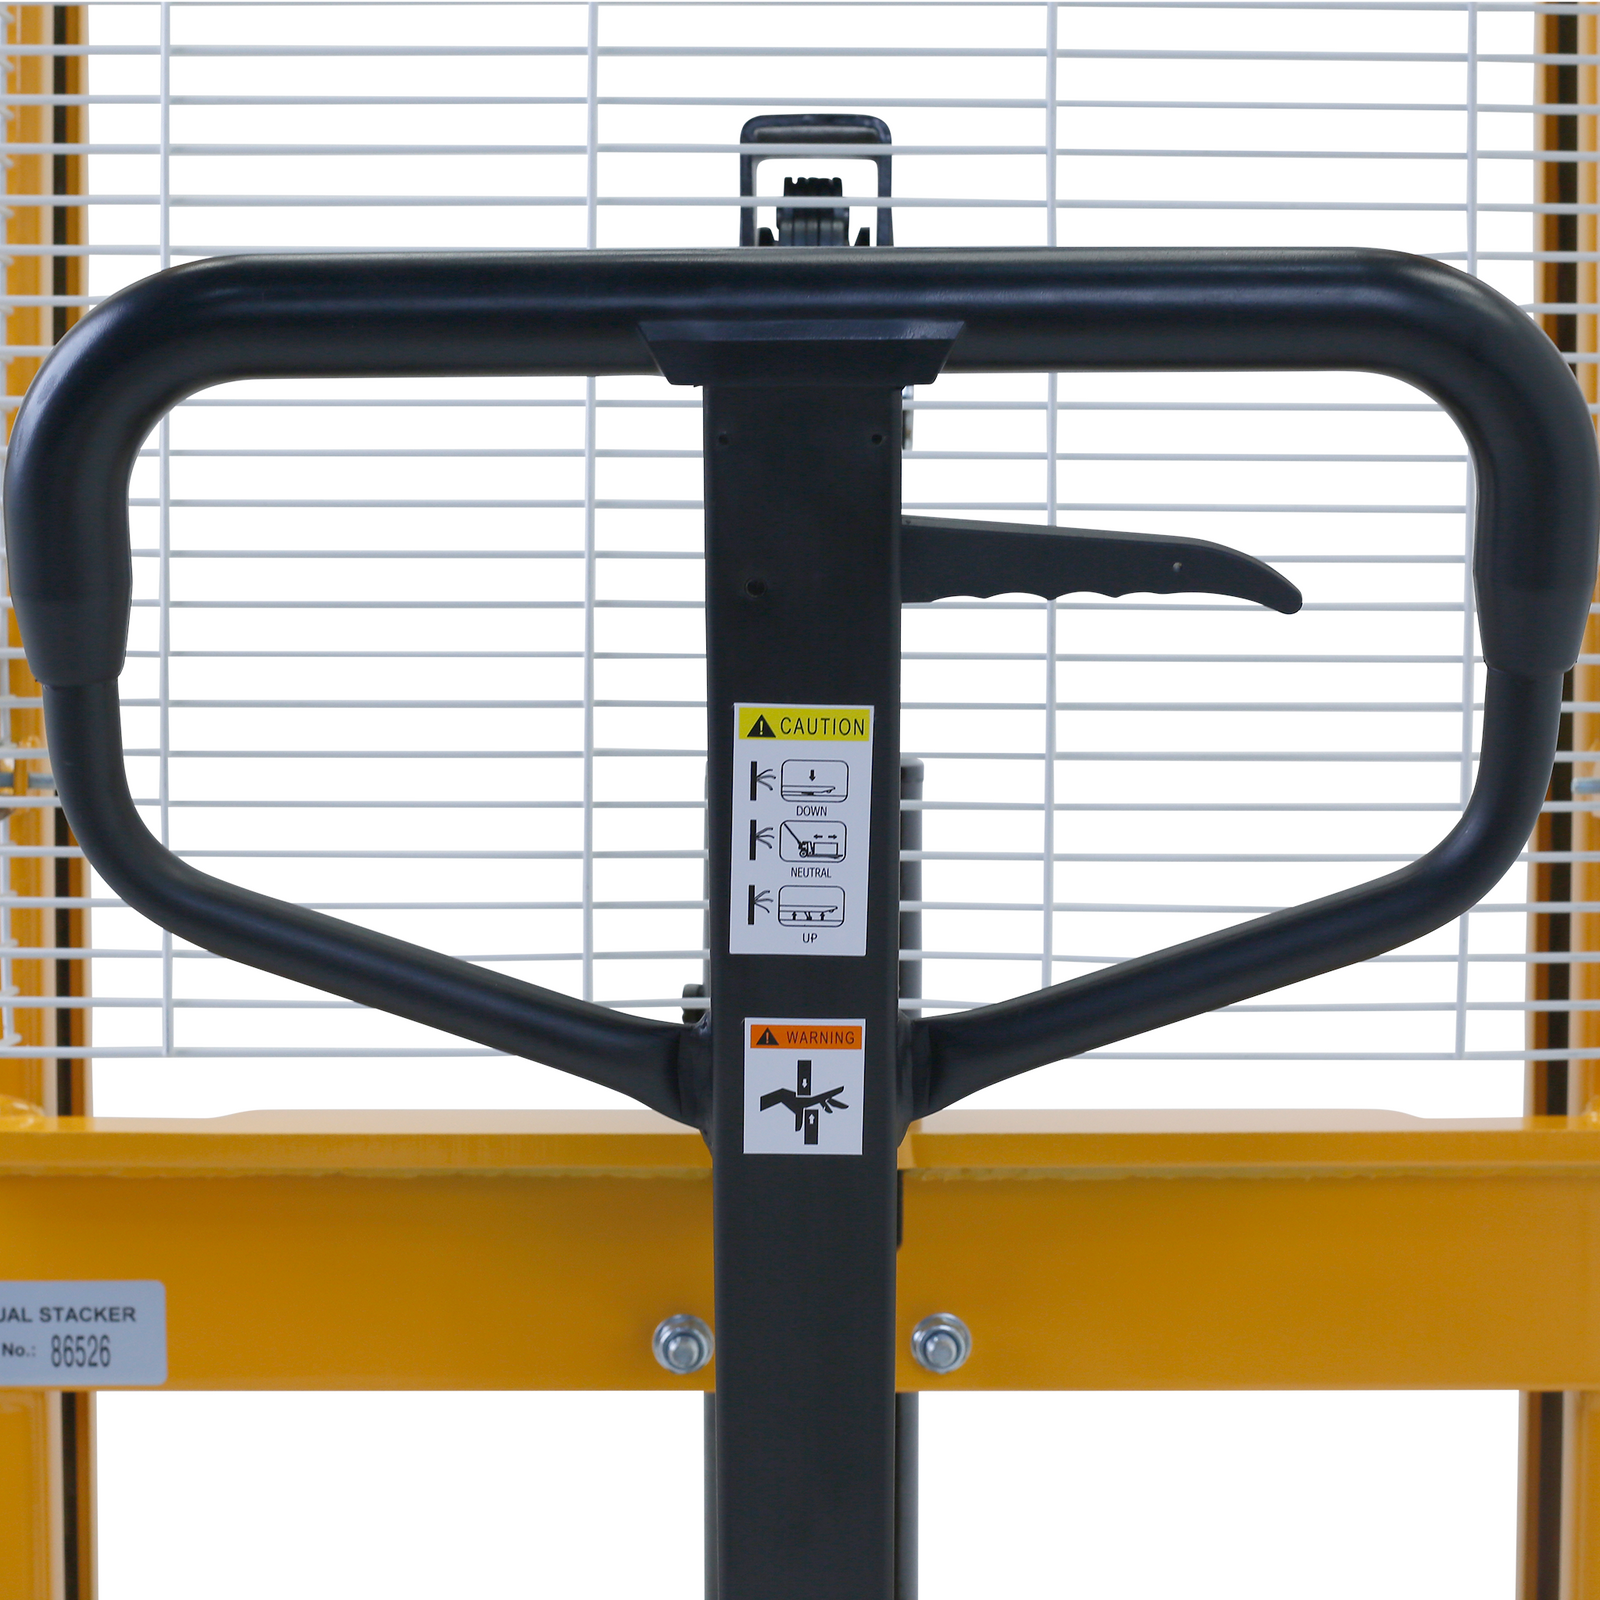 close up showing the handle of the JORES TECHNOLOGIES® pallet stacker